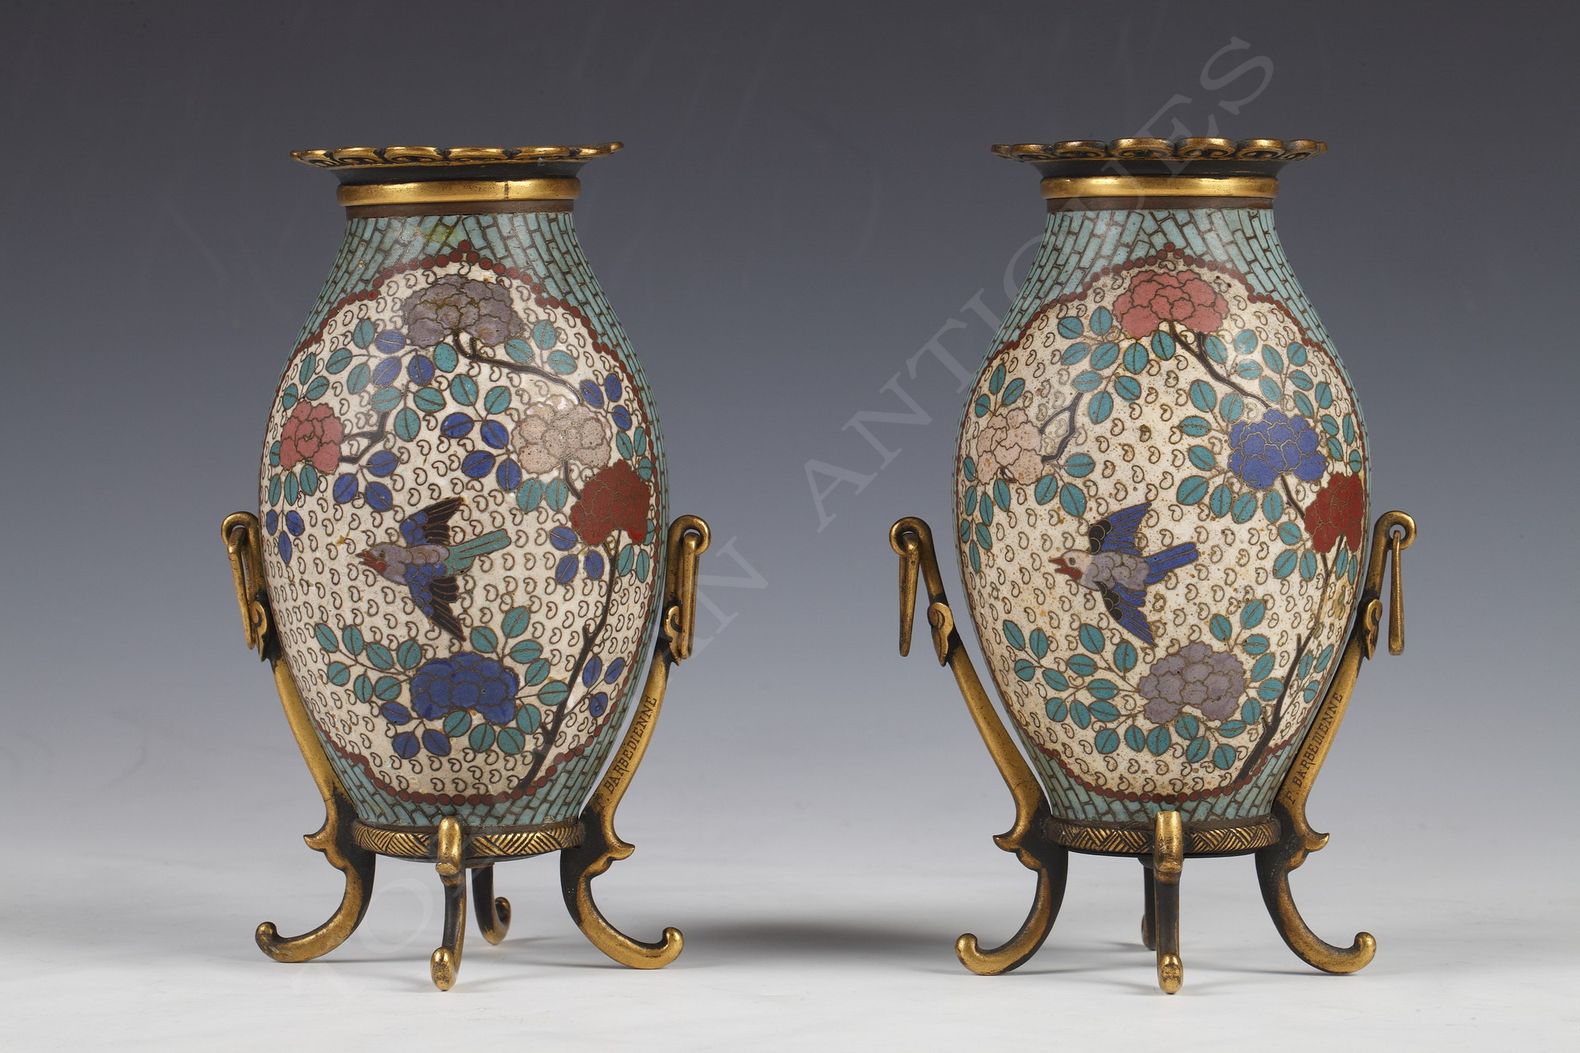 F. Barbedienne <br/> Pair of small cloisonné enamel vases